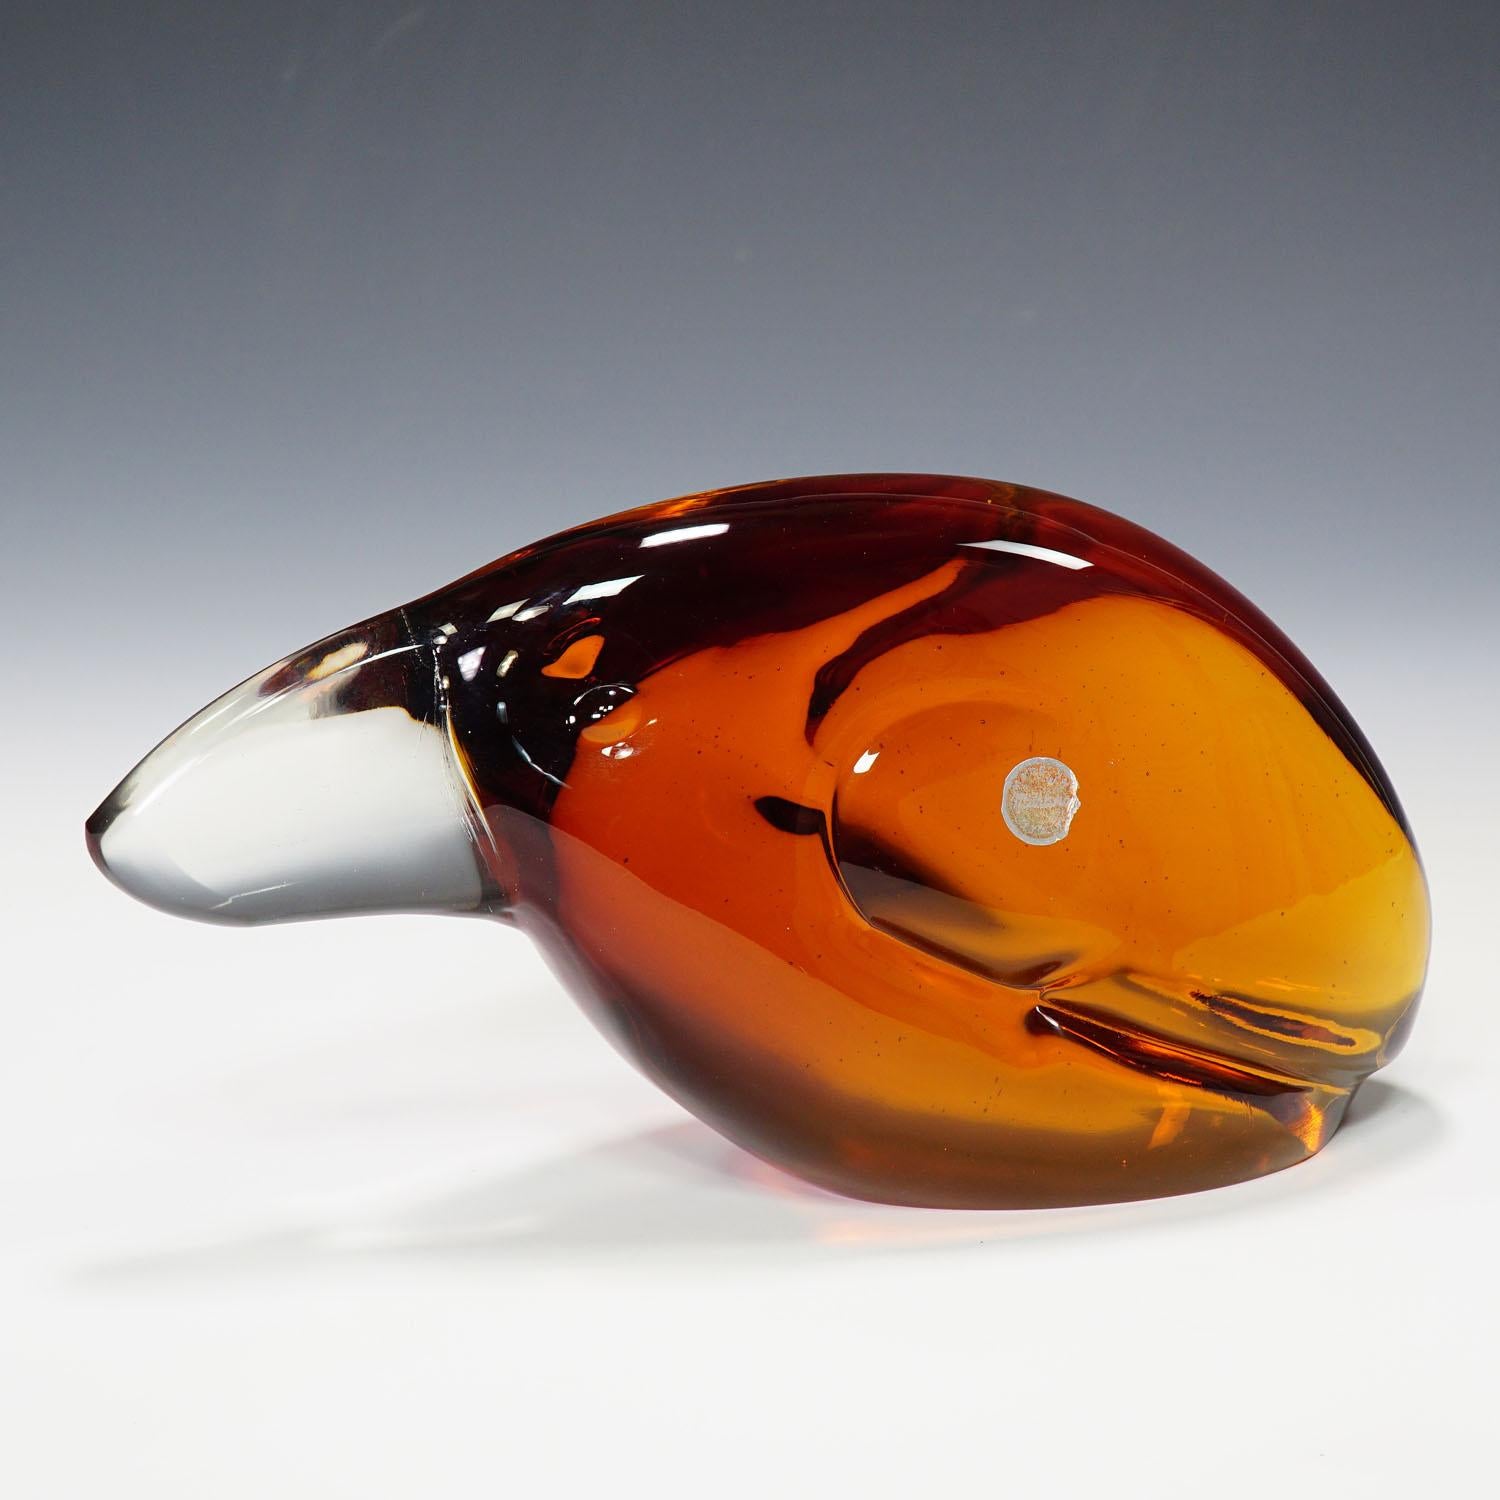 A heavy sculpture of a toucan in orange and clear glass. Designed by glass sculptor Livio Seguso ca. 1960. On the base with incised signature of the artist (LS) and made in Murano sticker on the body. Just another impressive example of his